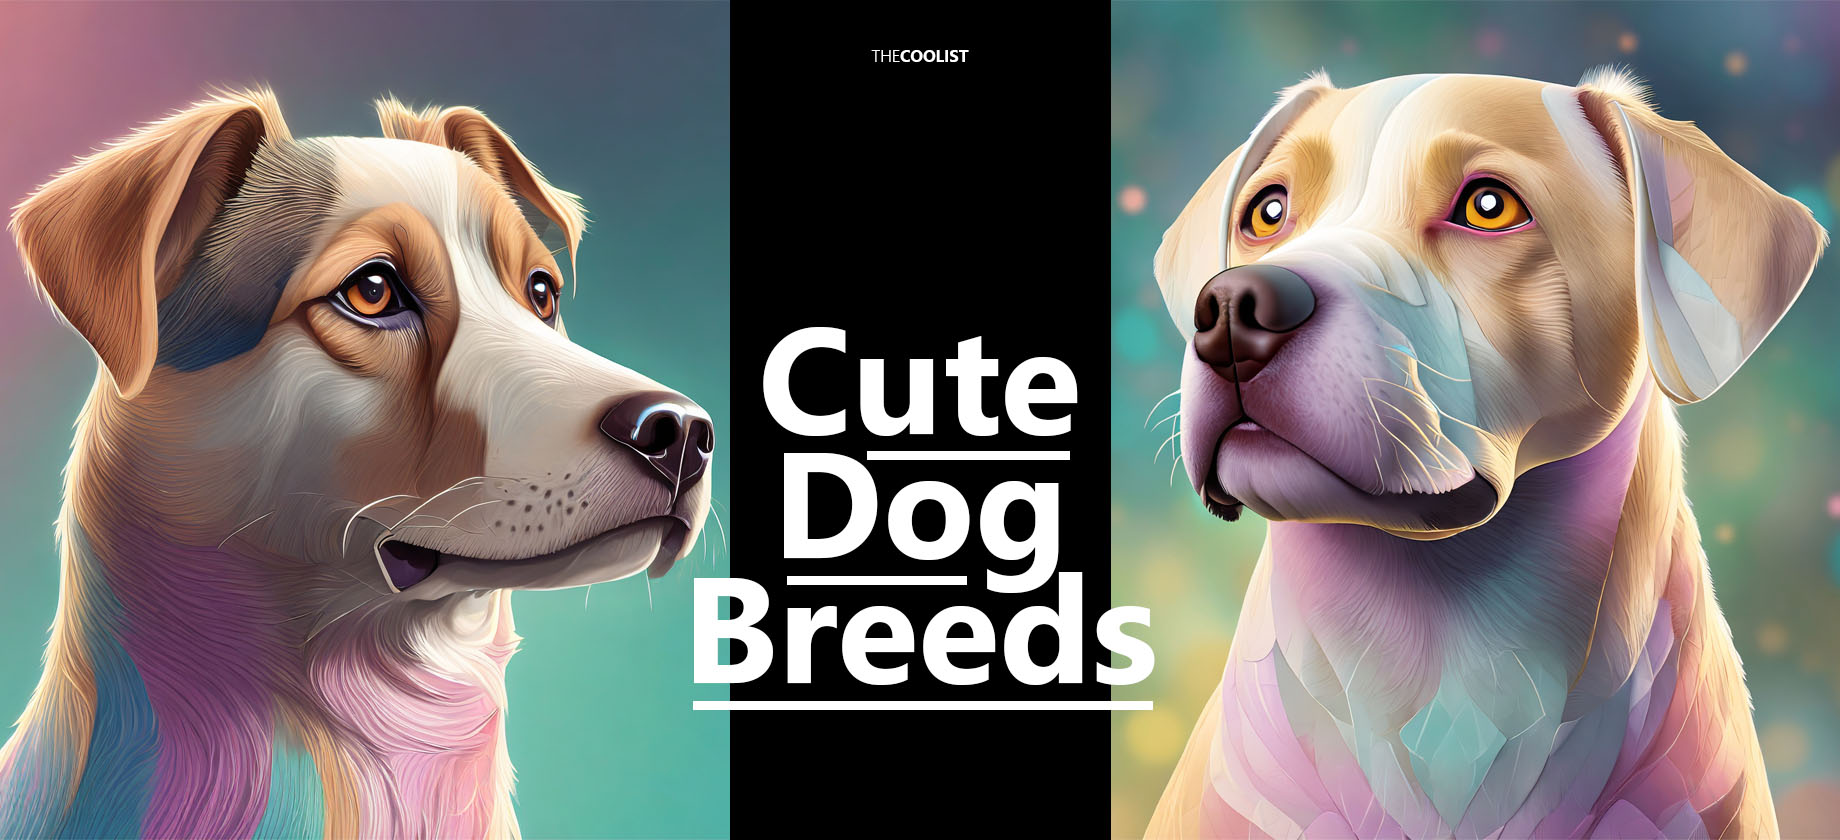 Analysis of the cutest dog breeds in the world